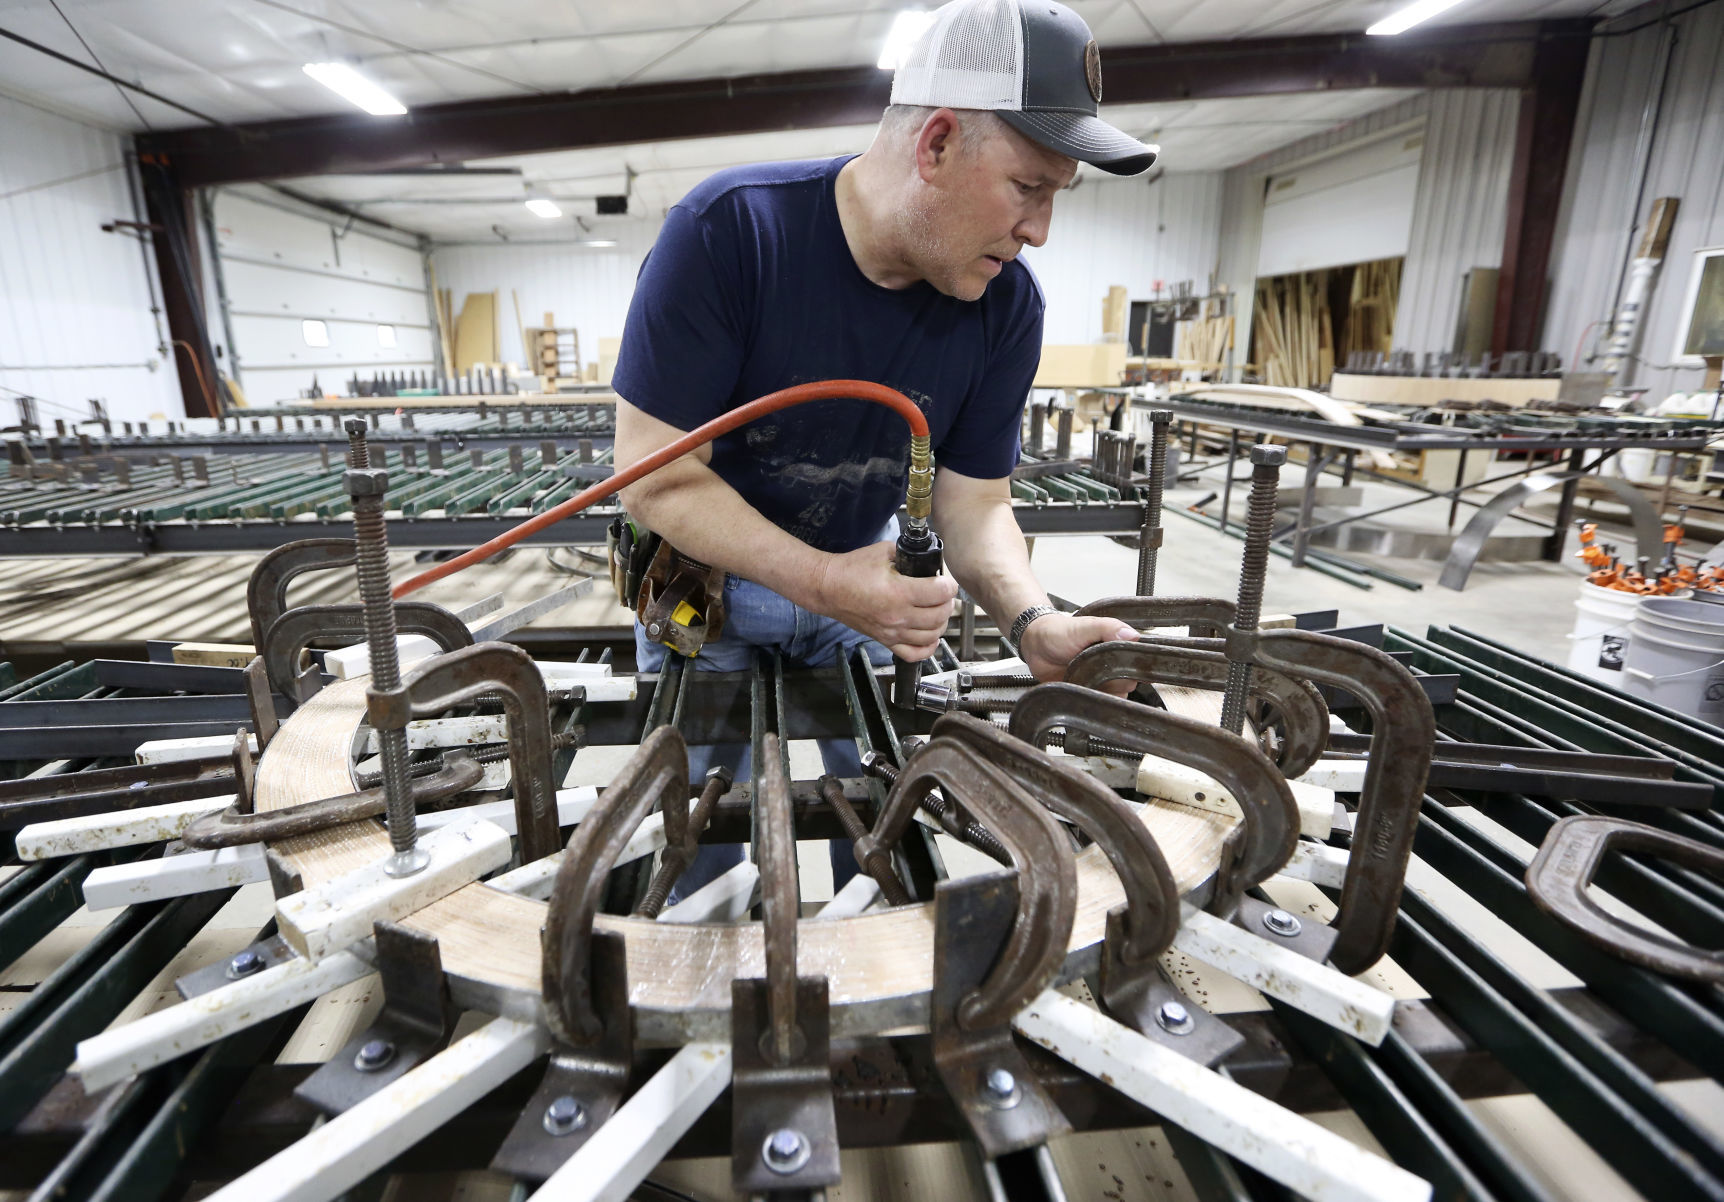 Dave Faust works to form a piece of wood at Heritage Wood Products in Worthington, Iowa, on Thursday, May 16, 2019.    PHOTO CREDIT: NICKI KOHL